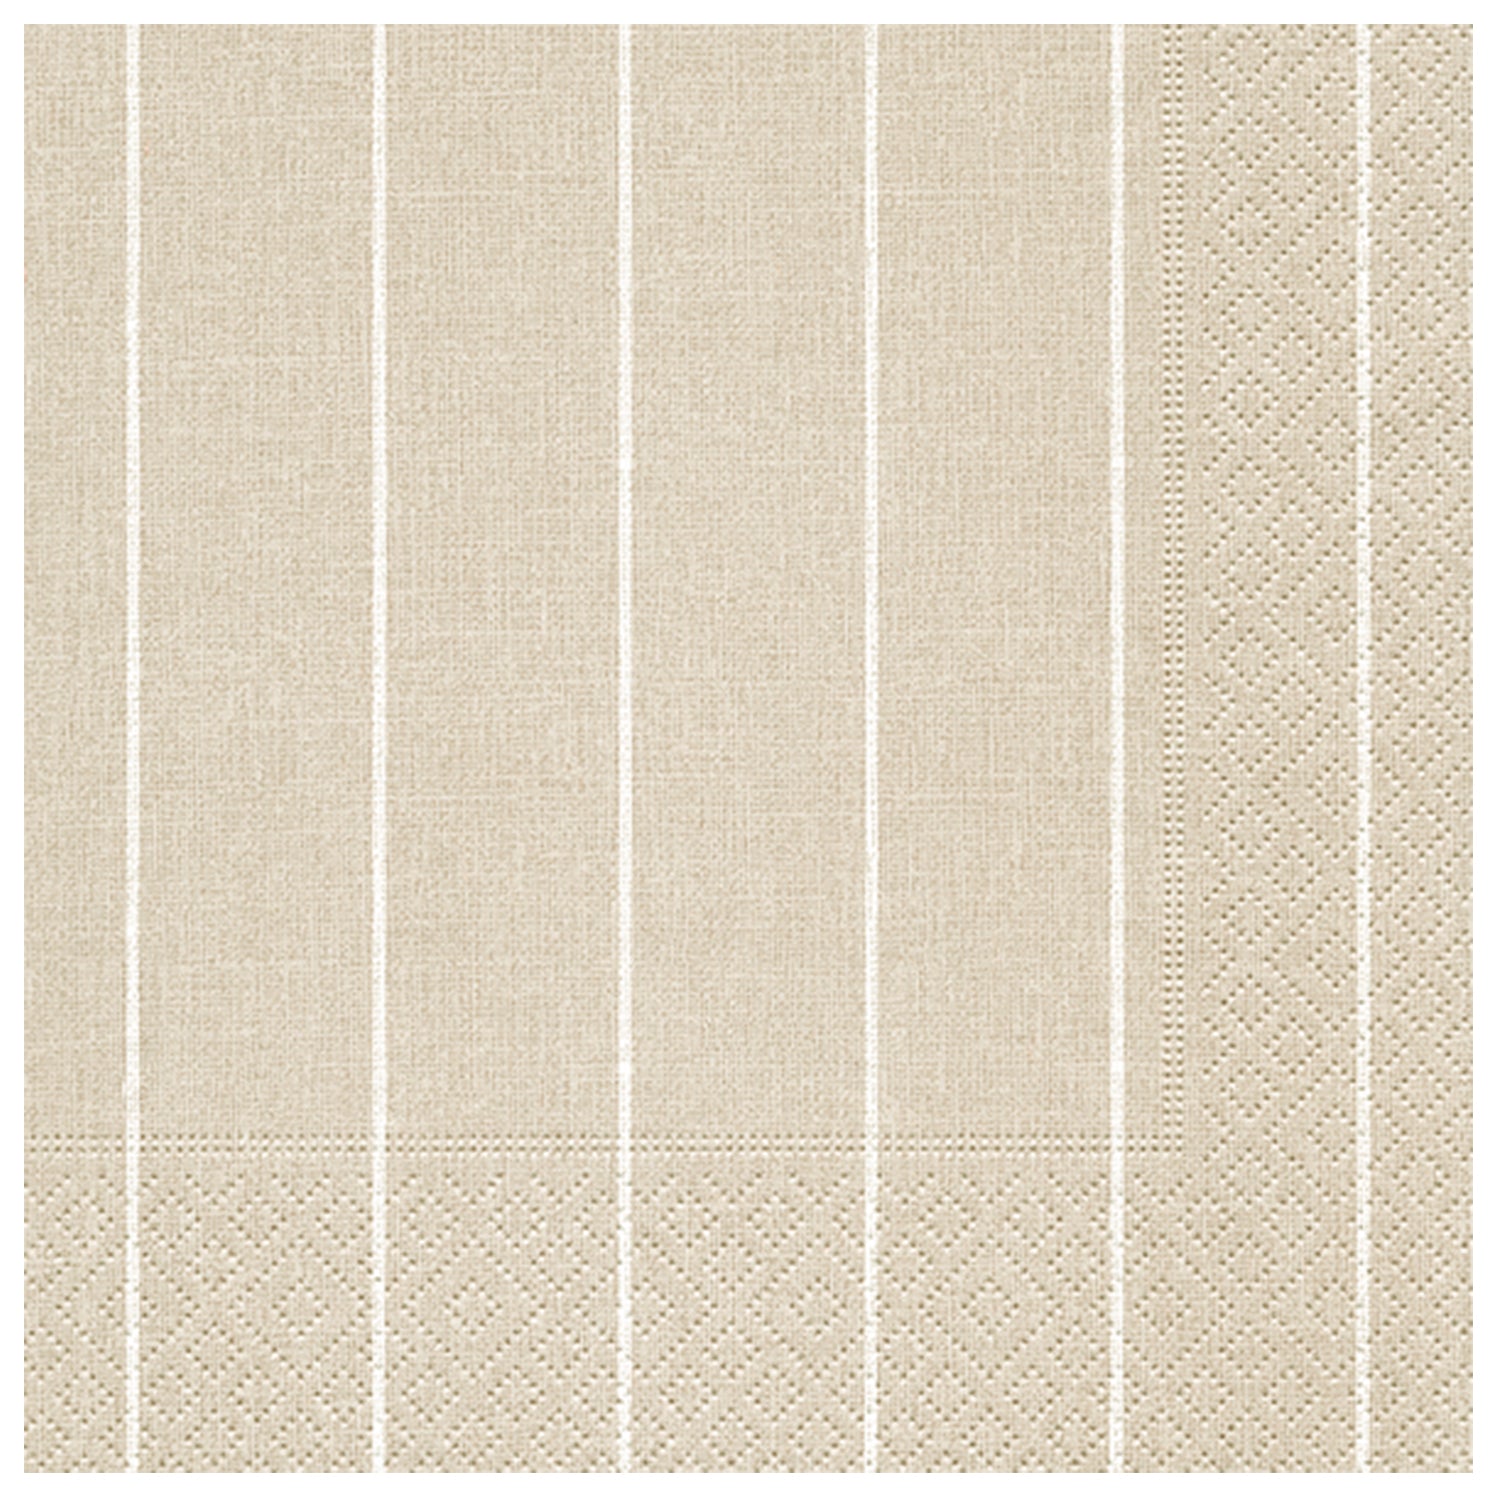 BEIGE NAPKIN WITH WHITE LINES